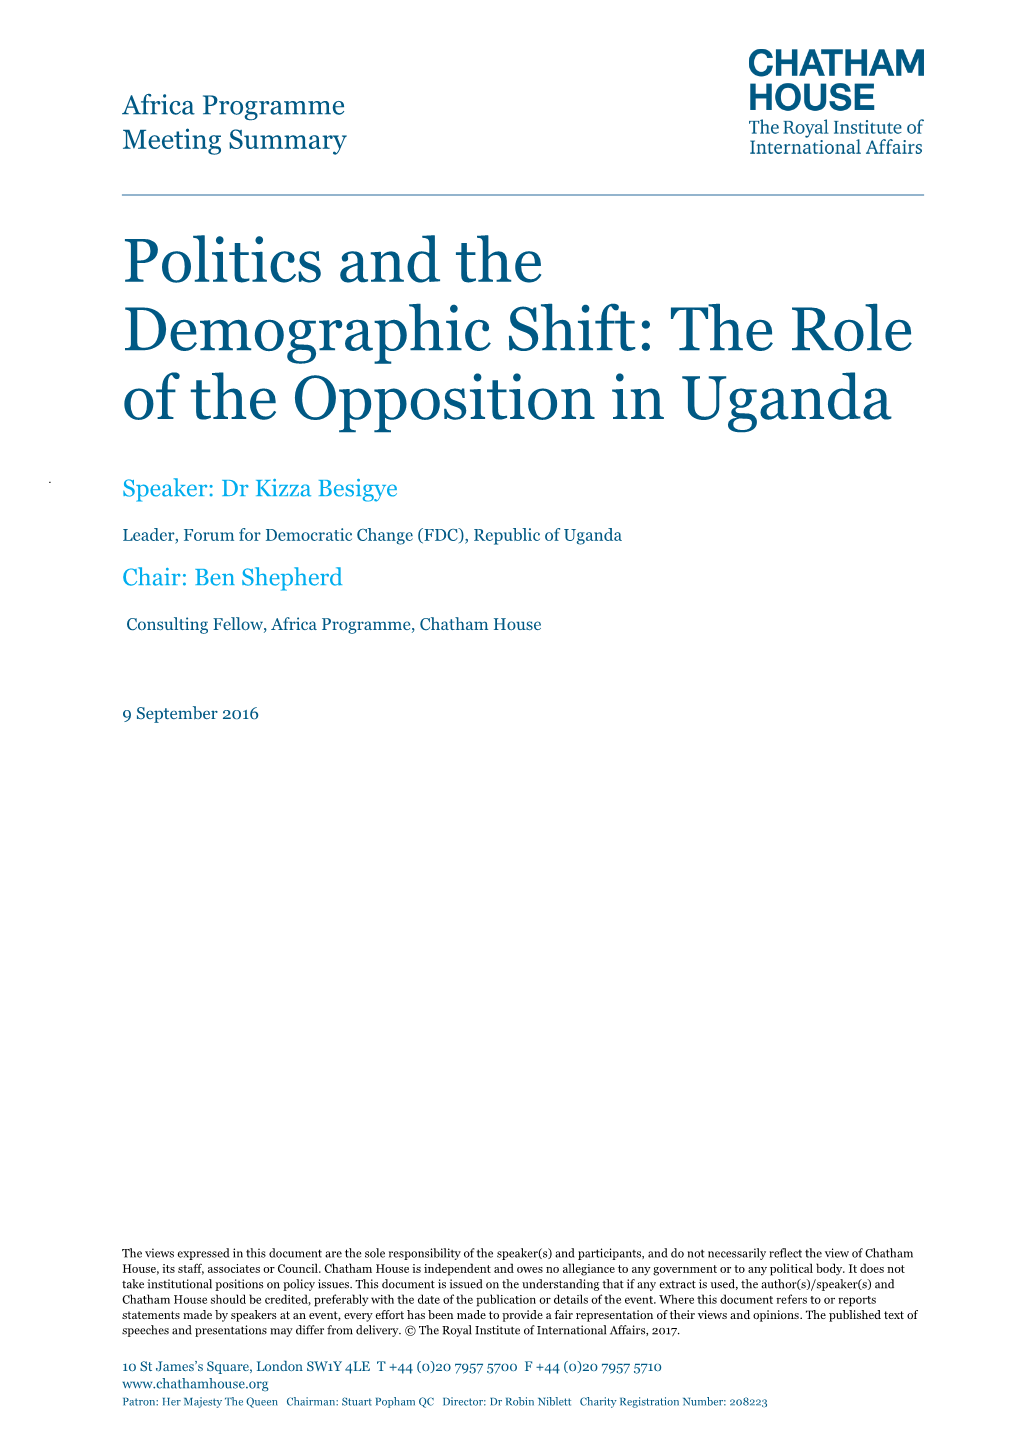 Politics and the Demographic Shift: the Role of the Opposition in Uganda